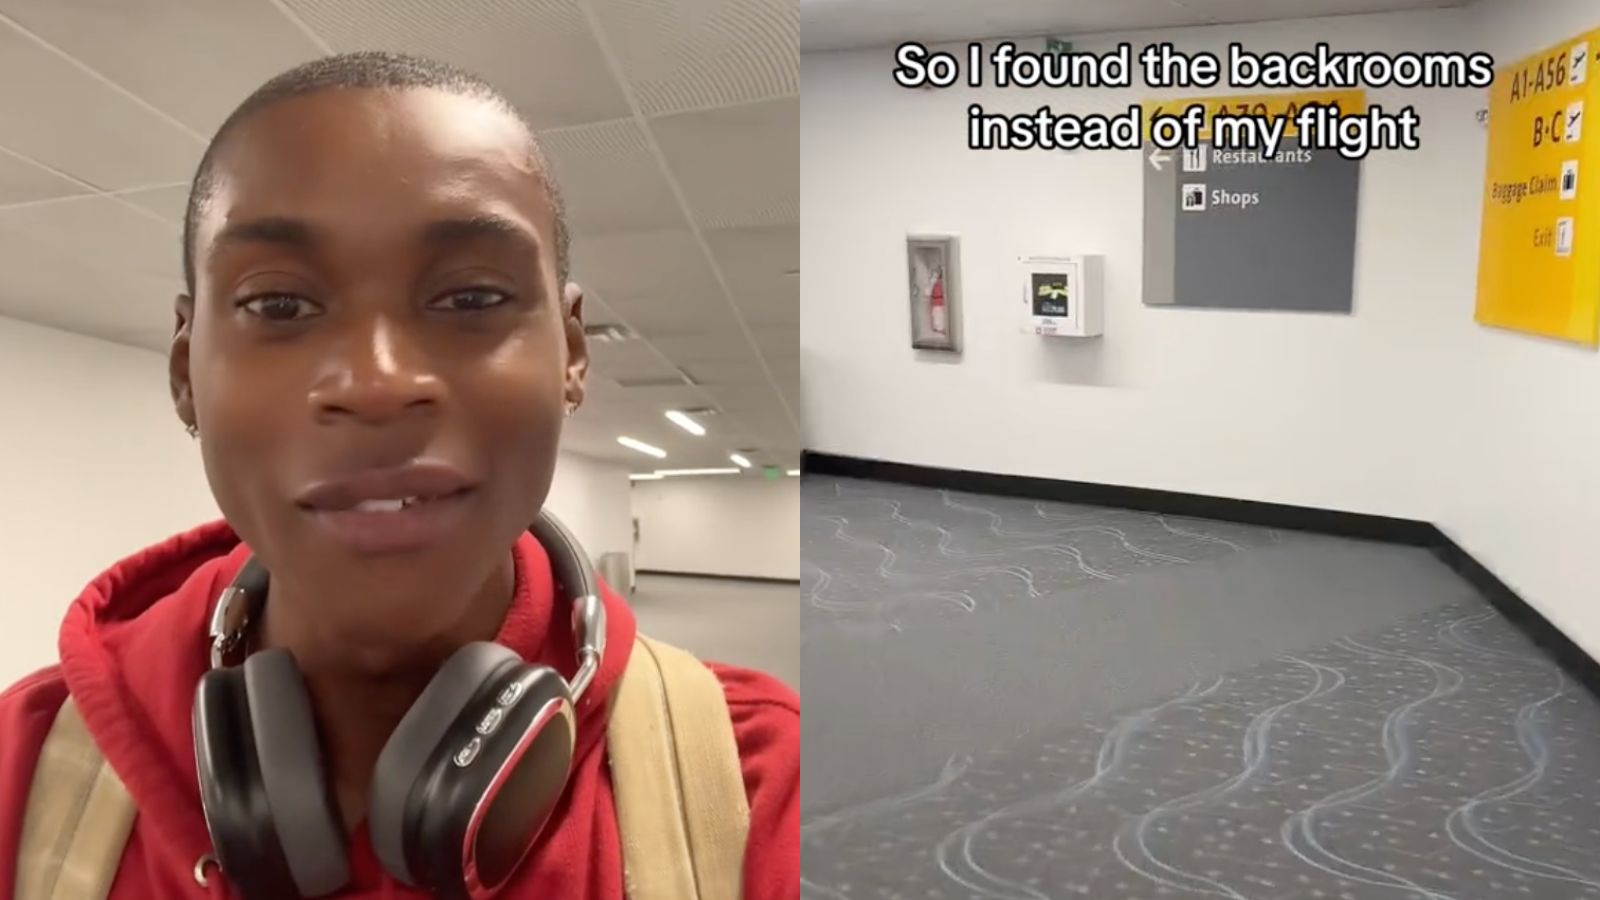 Man goes viral after discovering “haunted” back rooms at Denver airport